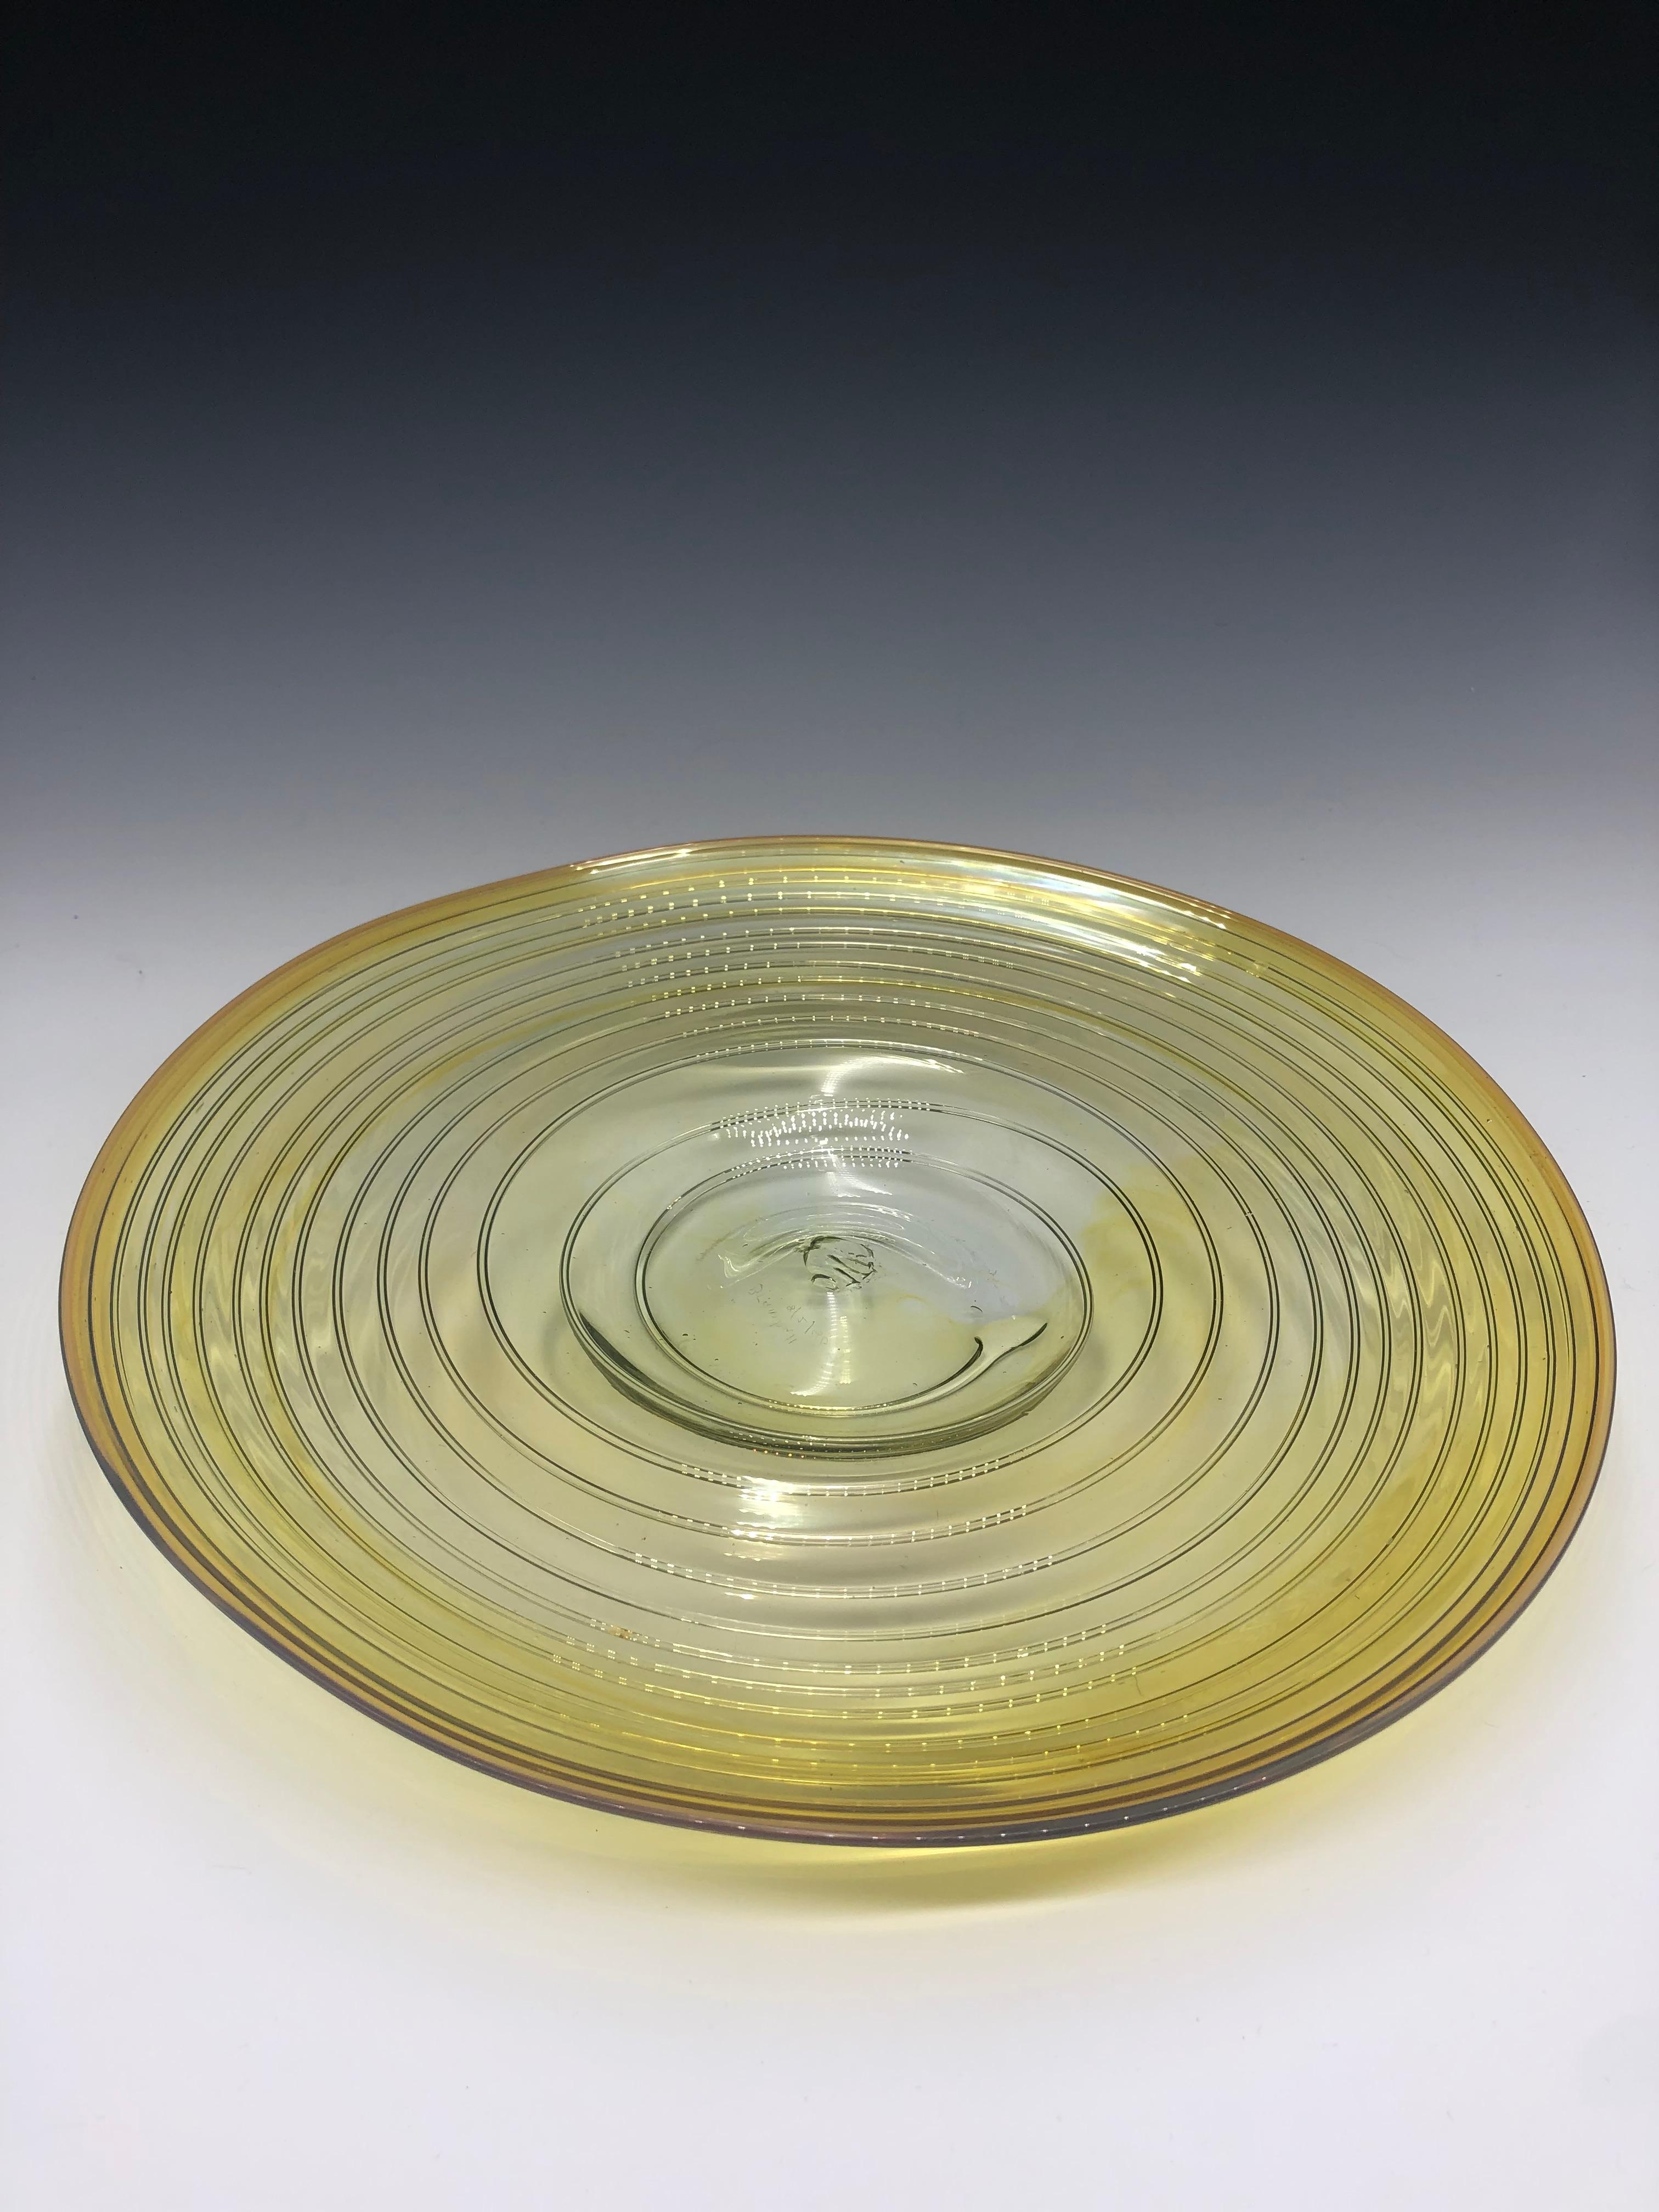 American Vintage Hand Blown Studio Art Glass Plate by Peter Bramhall For Sale